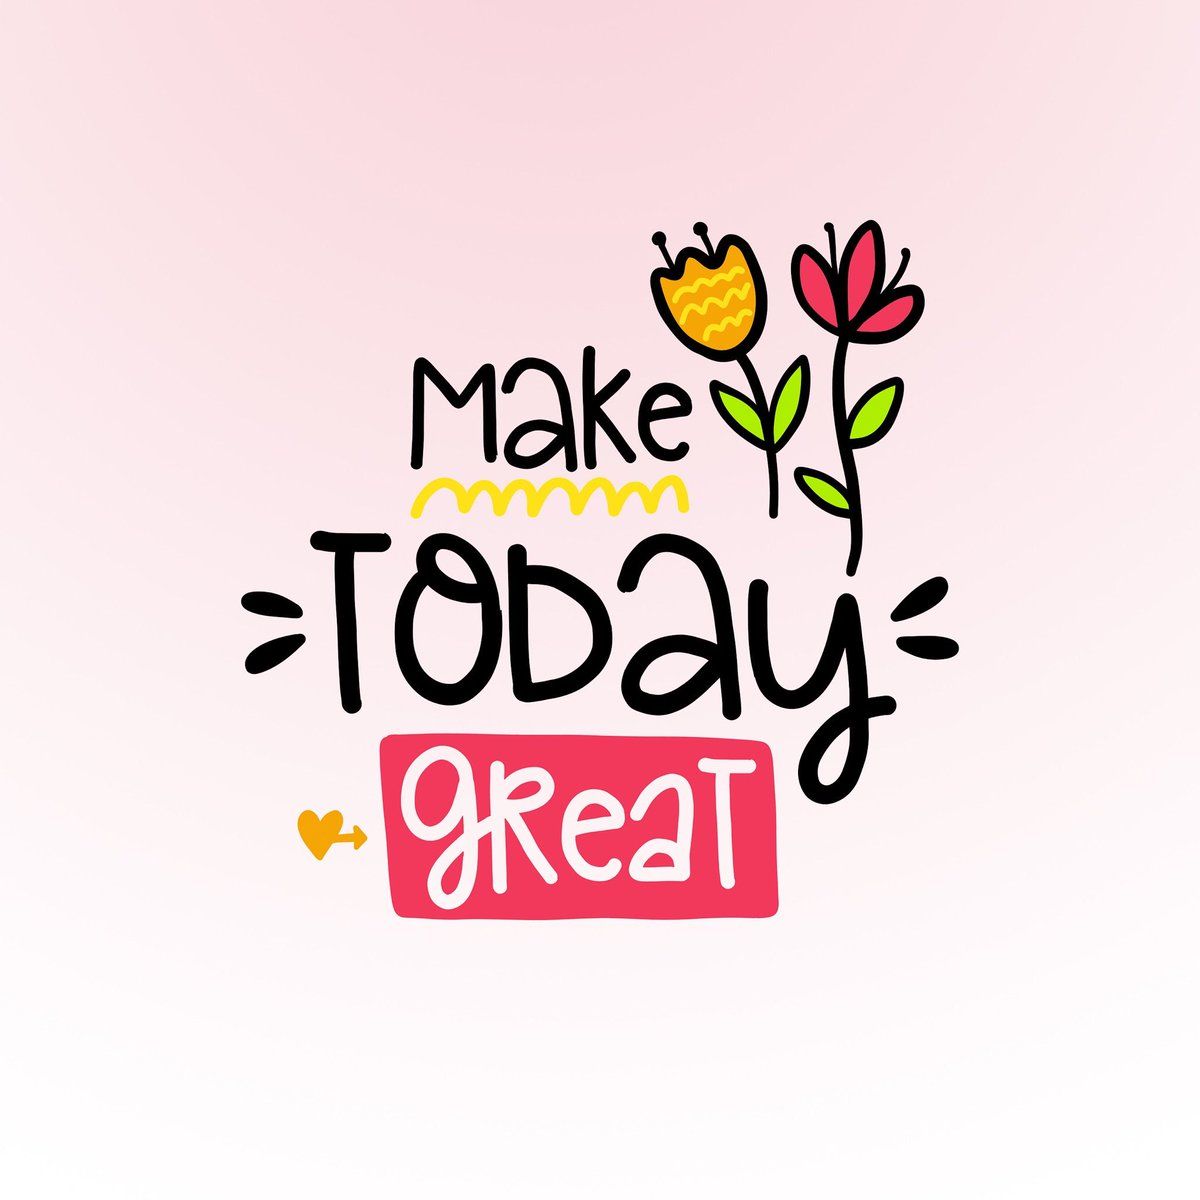 Its A Good Day To Have A Good Day Wallpapers